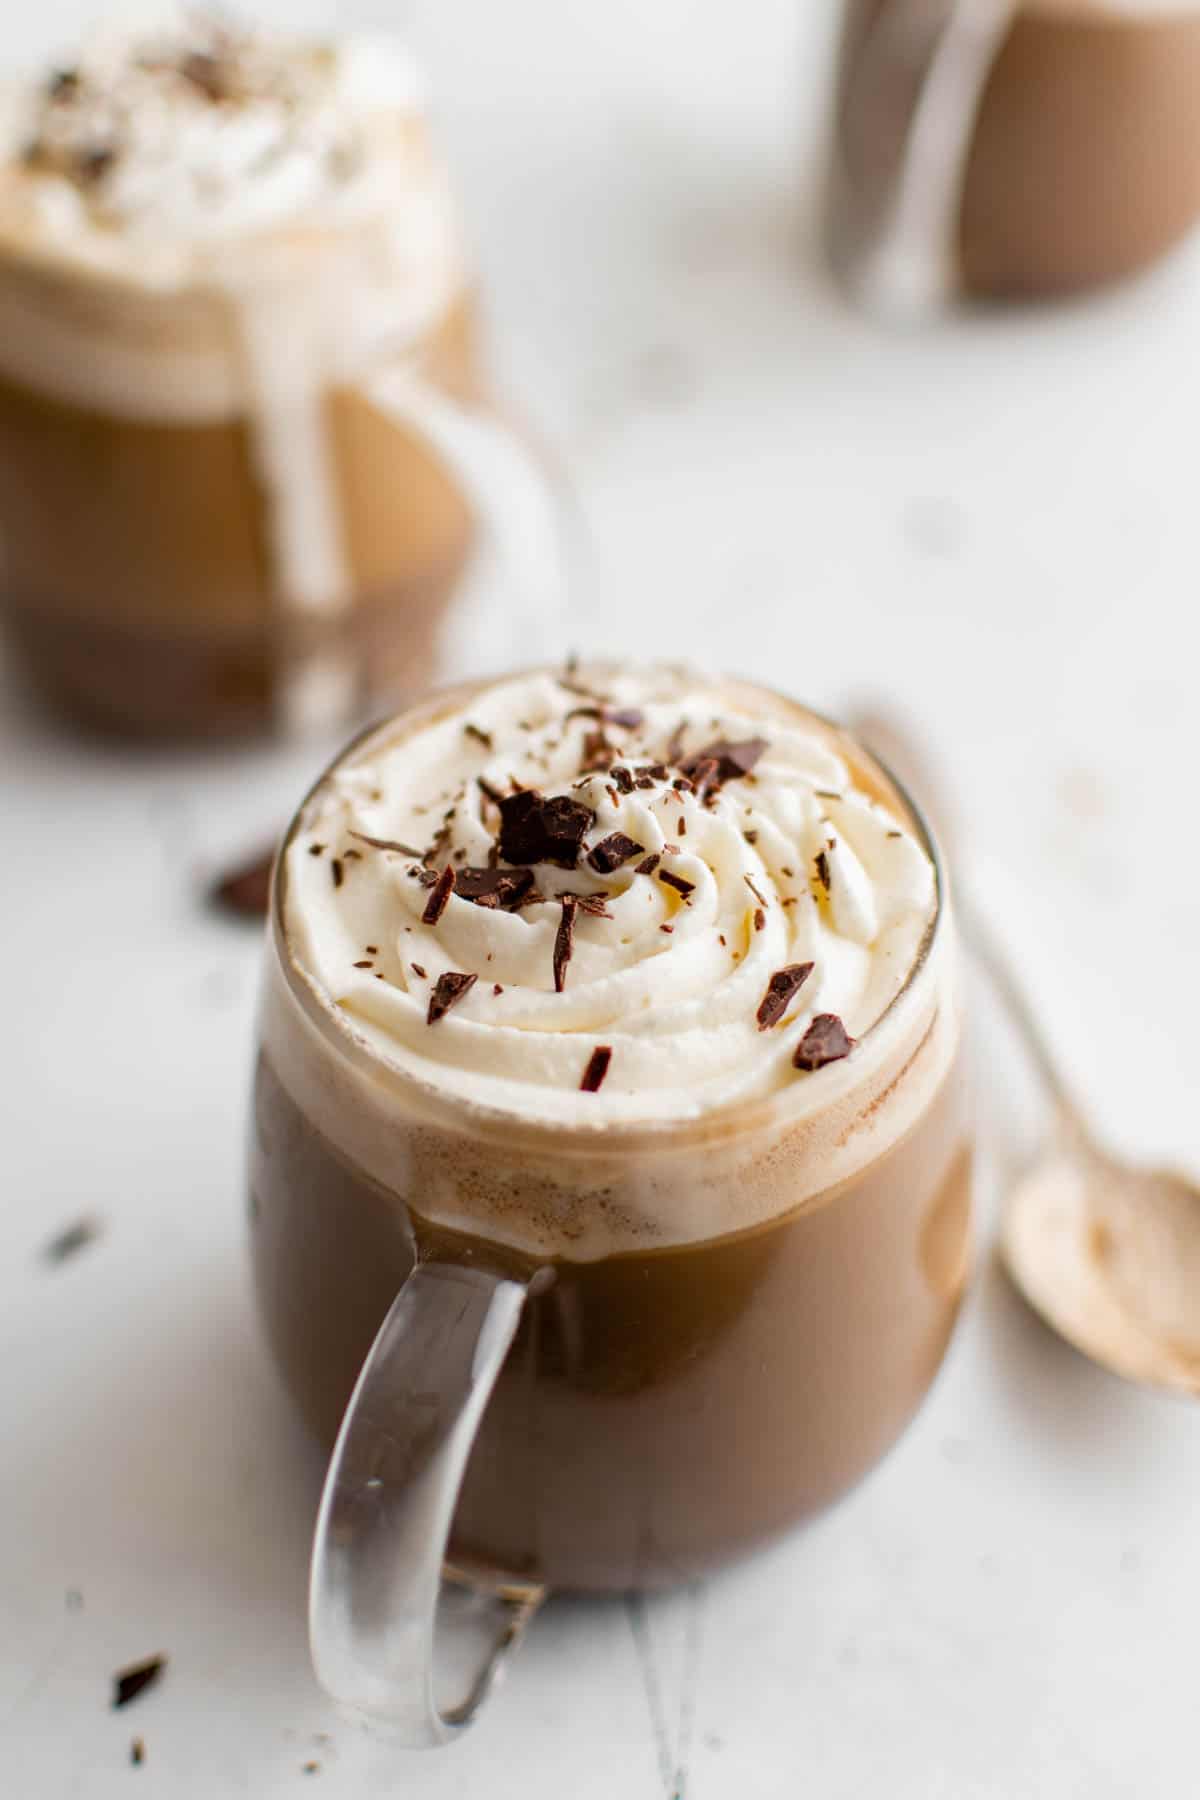 two mocha lattes in glass mugs with whipped cream on top